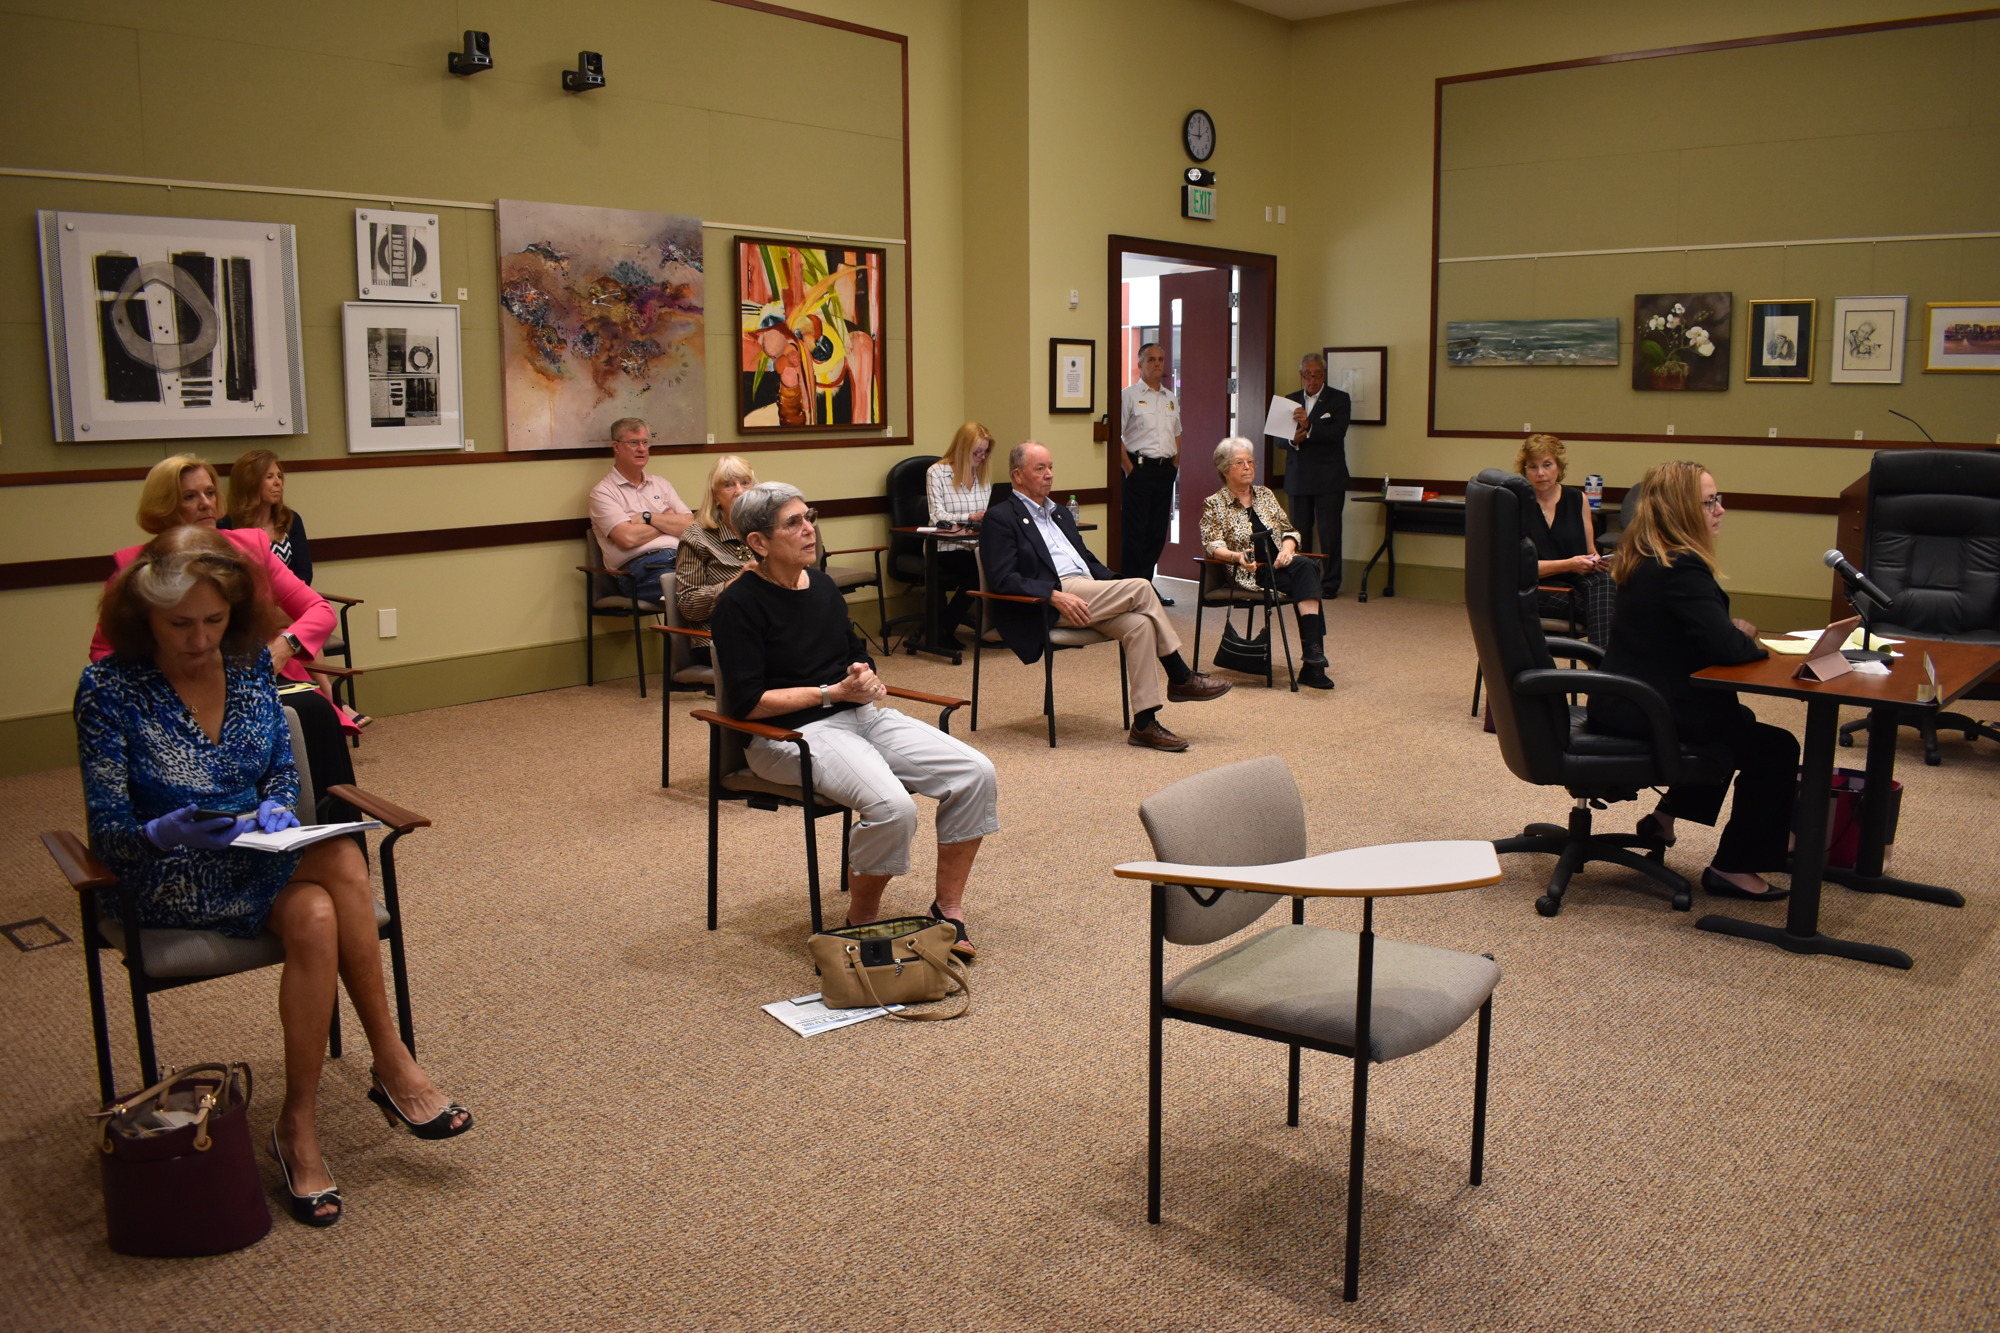 The Longboat Key Town Commission's last in-person meeting was held on March 23. Town staff spaced out chairs inside the chambers to practice social distancing.